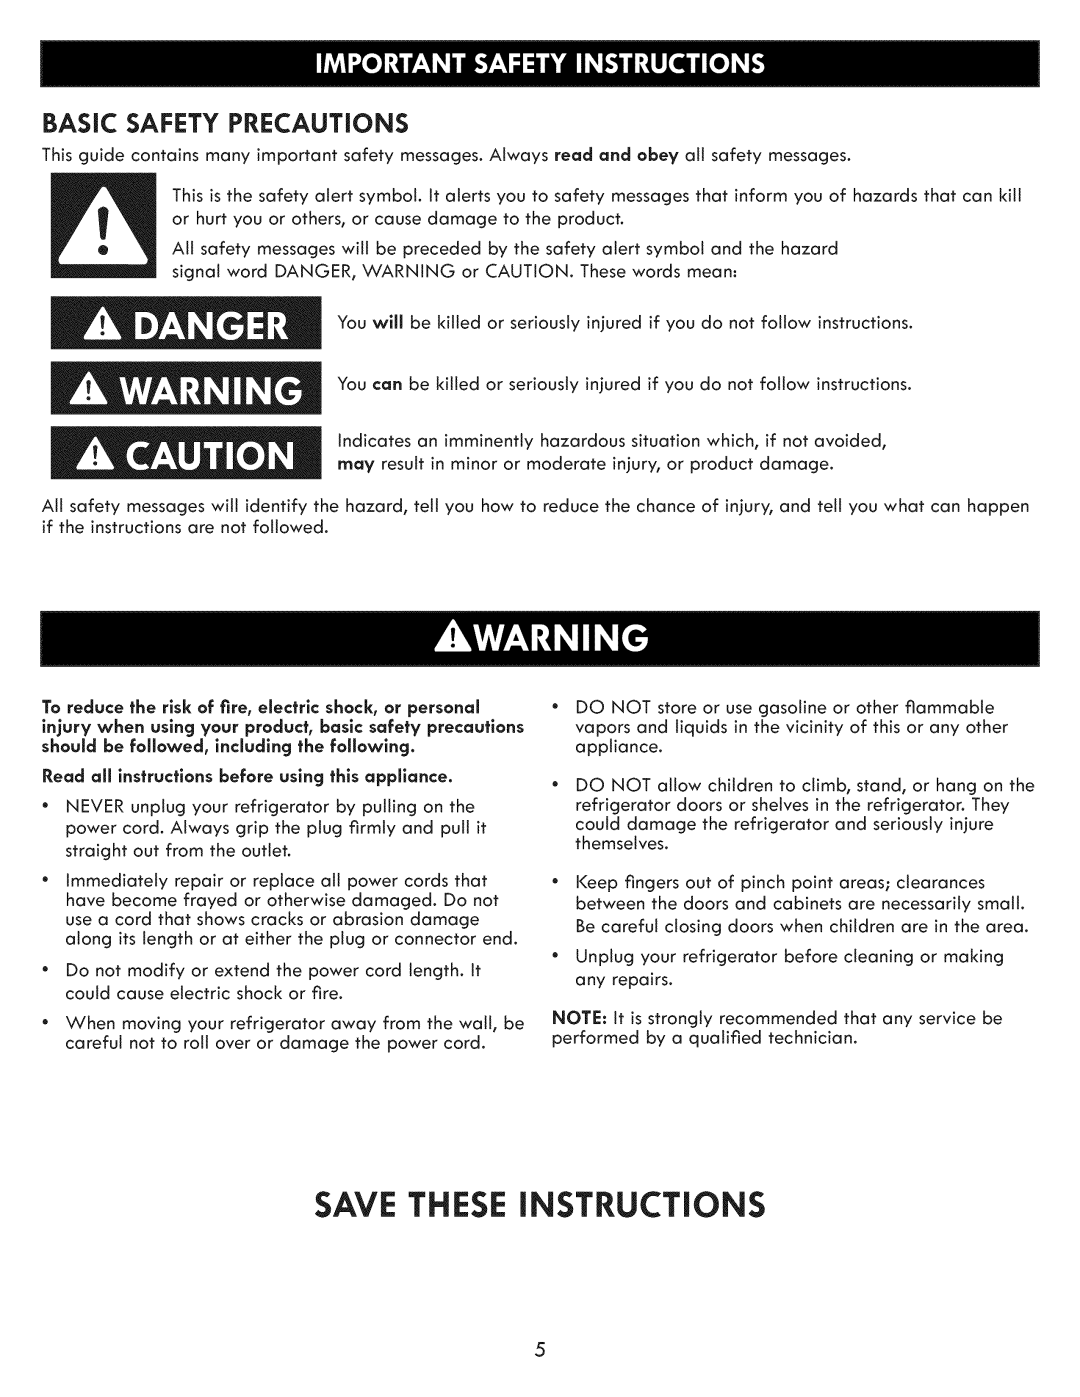 Kenmore 795.7205 manual Save These Instructions, Basic Safety Precautions 